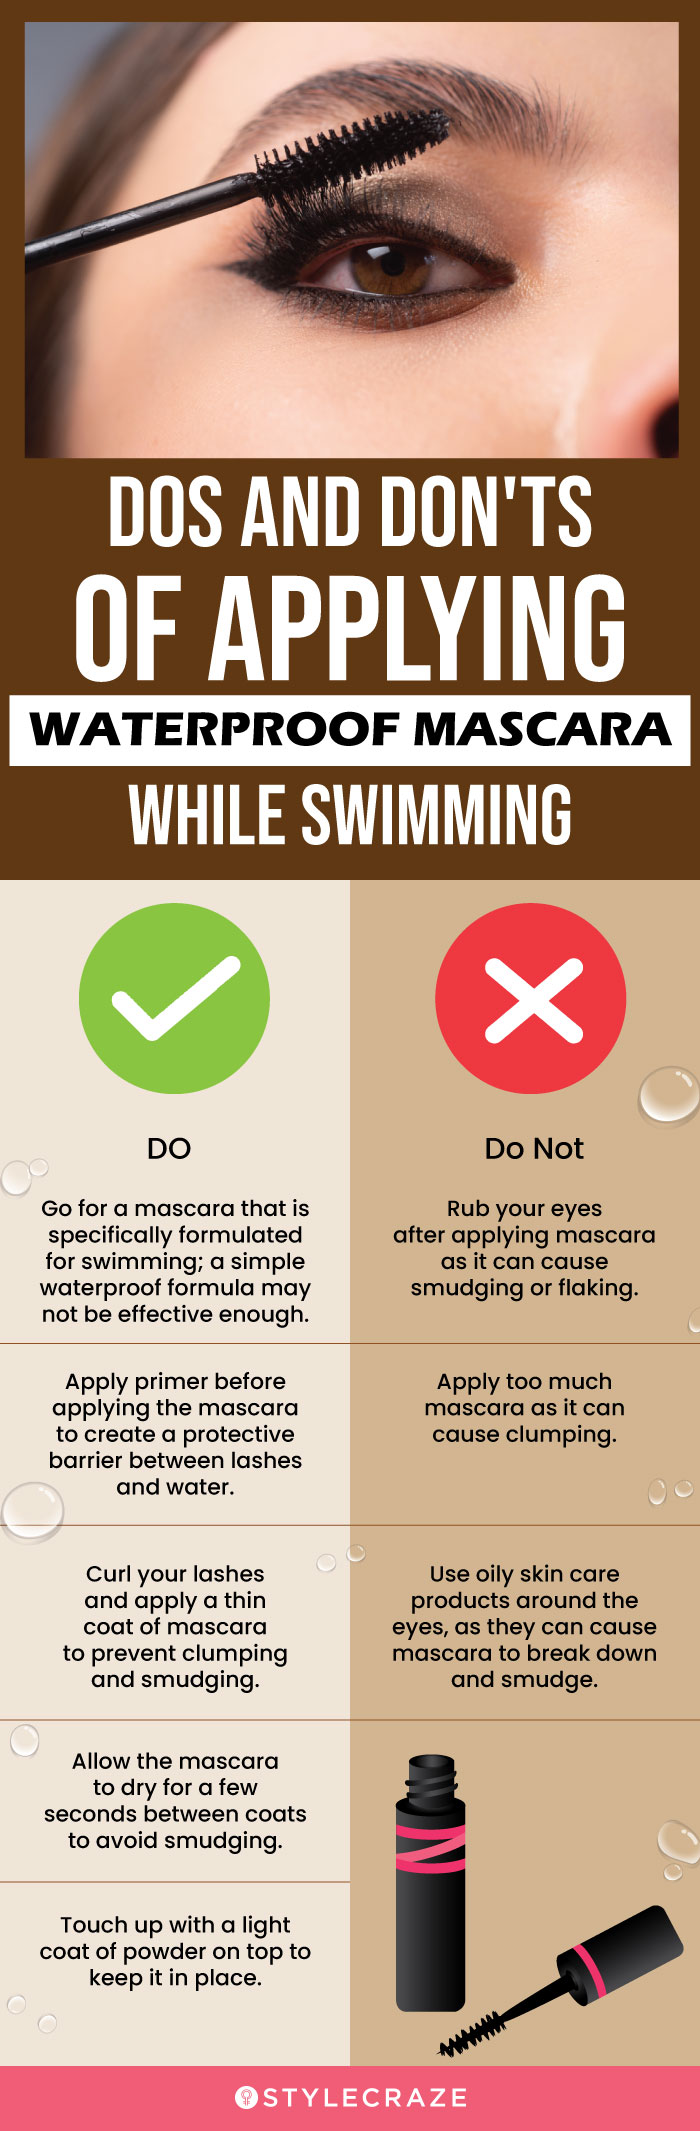 Dos and Don'ts Of Applying Waterproof Mascara While Swimming (infographic)